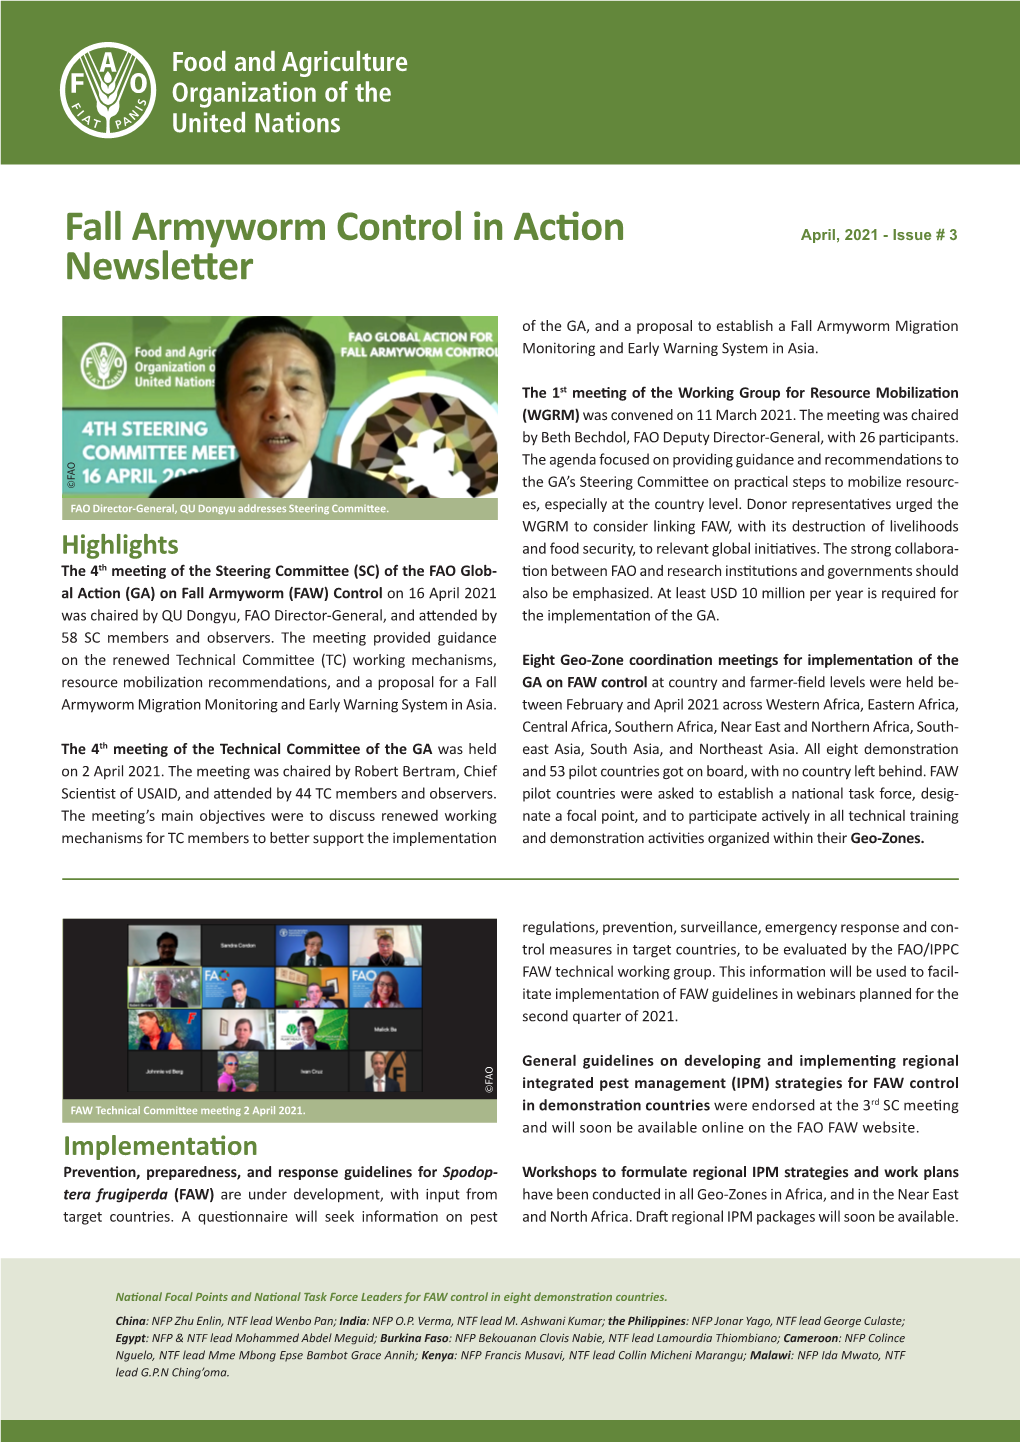 Fall Armyworm Control in Action Newsletter, May 2021